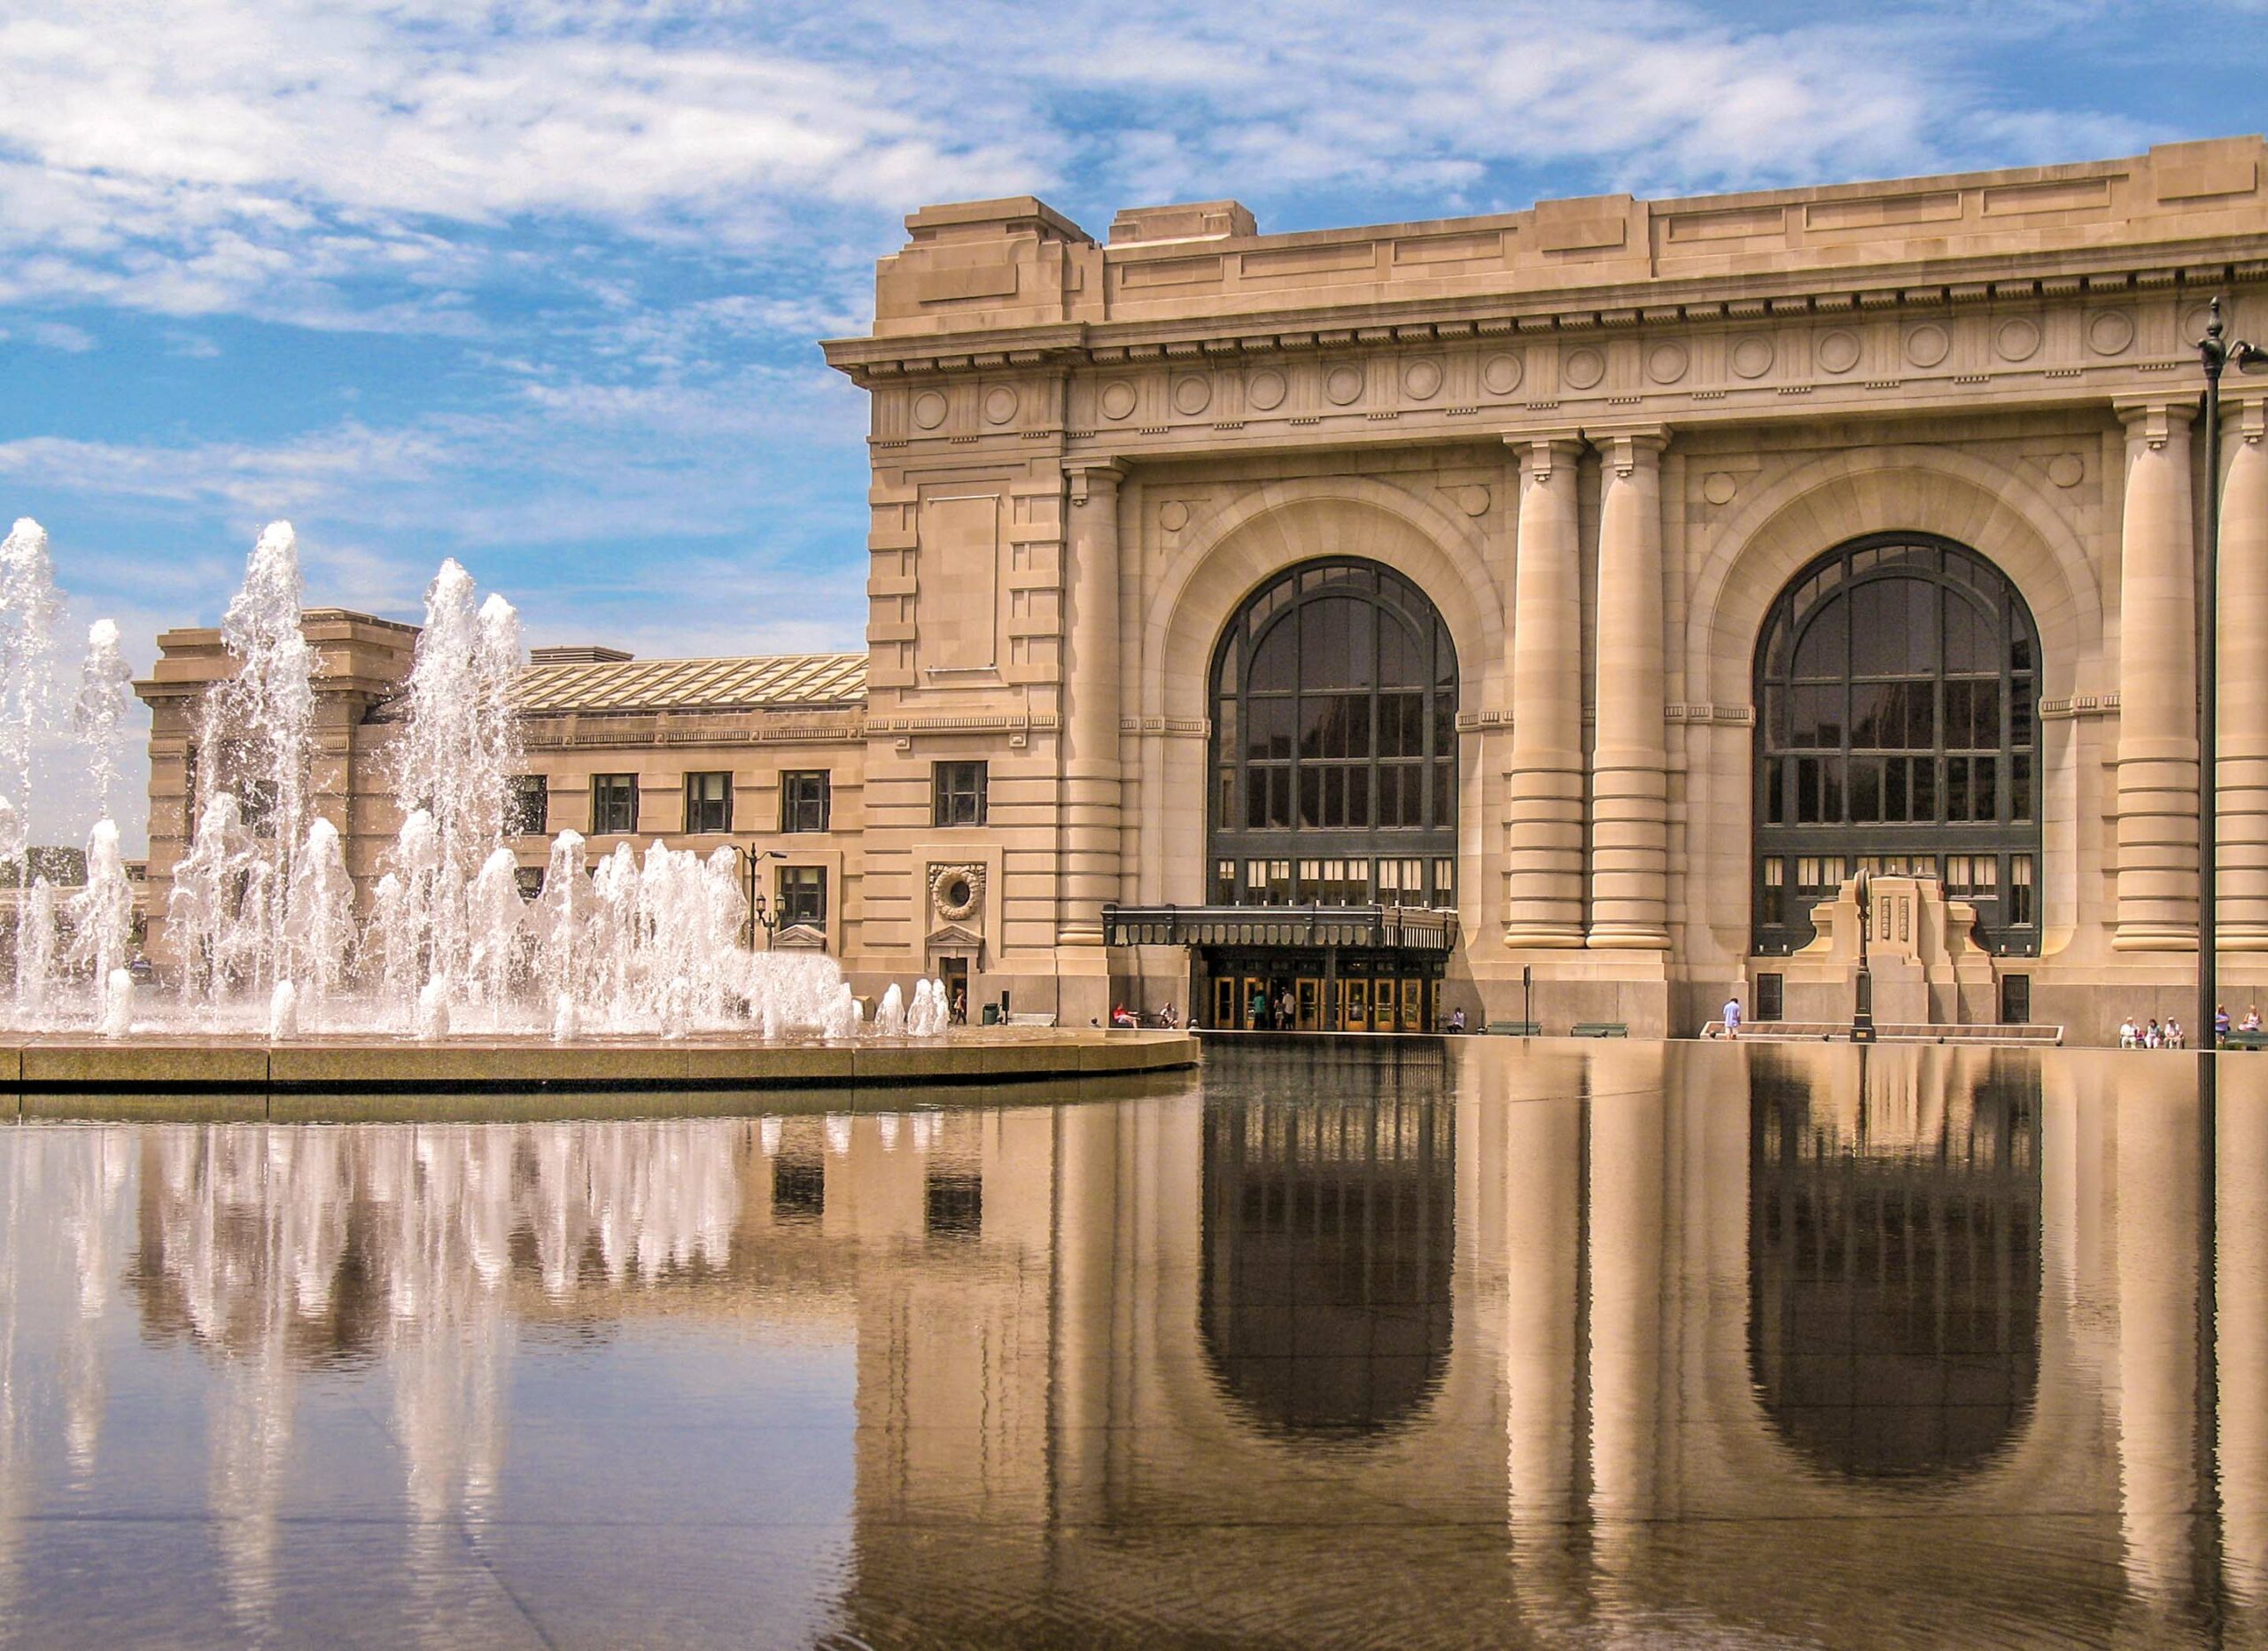 A grand, historic building with large arched windows is reflected in a calm pool of water. In front, a group of fountains sprays water into the air against a backdrop of a partly cloudy sky. The beige facade of the building contrasts with the blue sky and water.